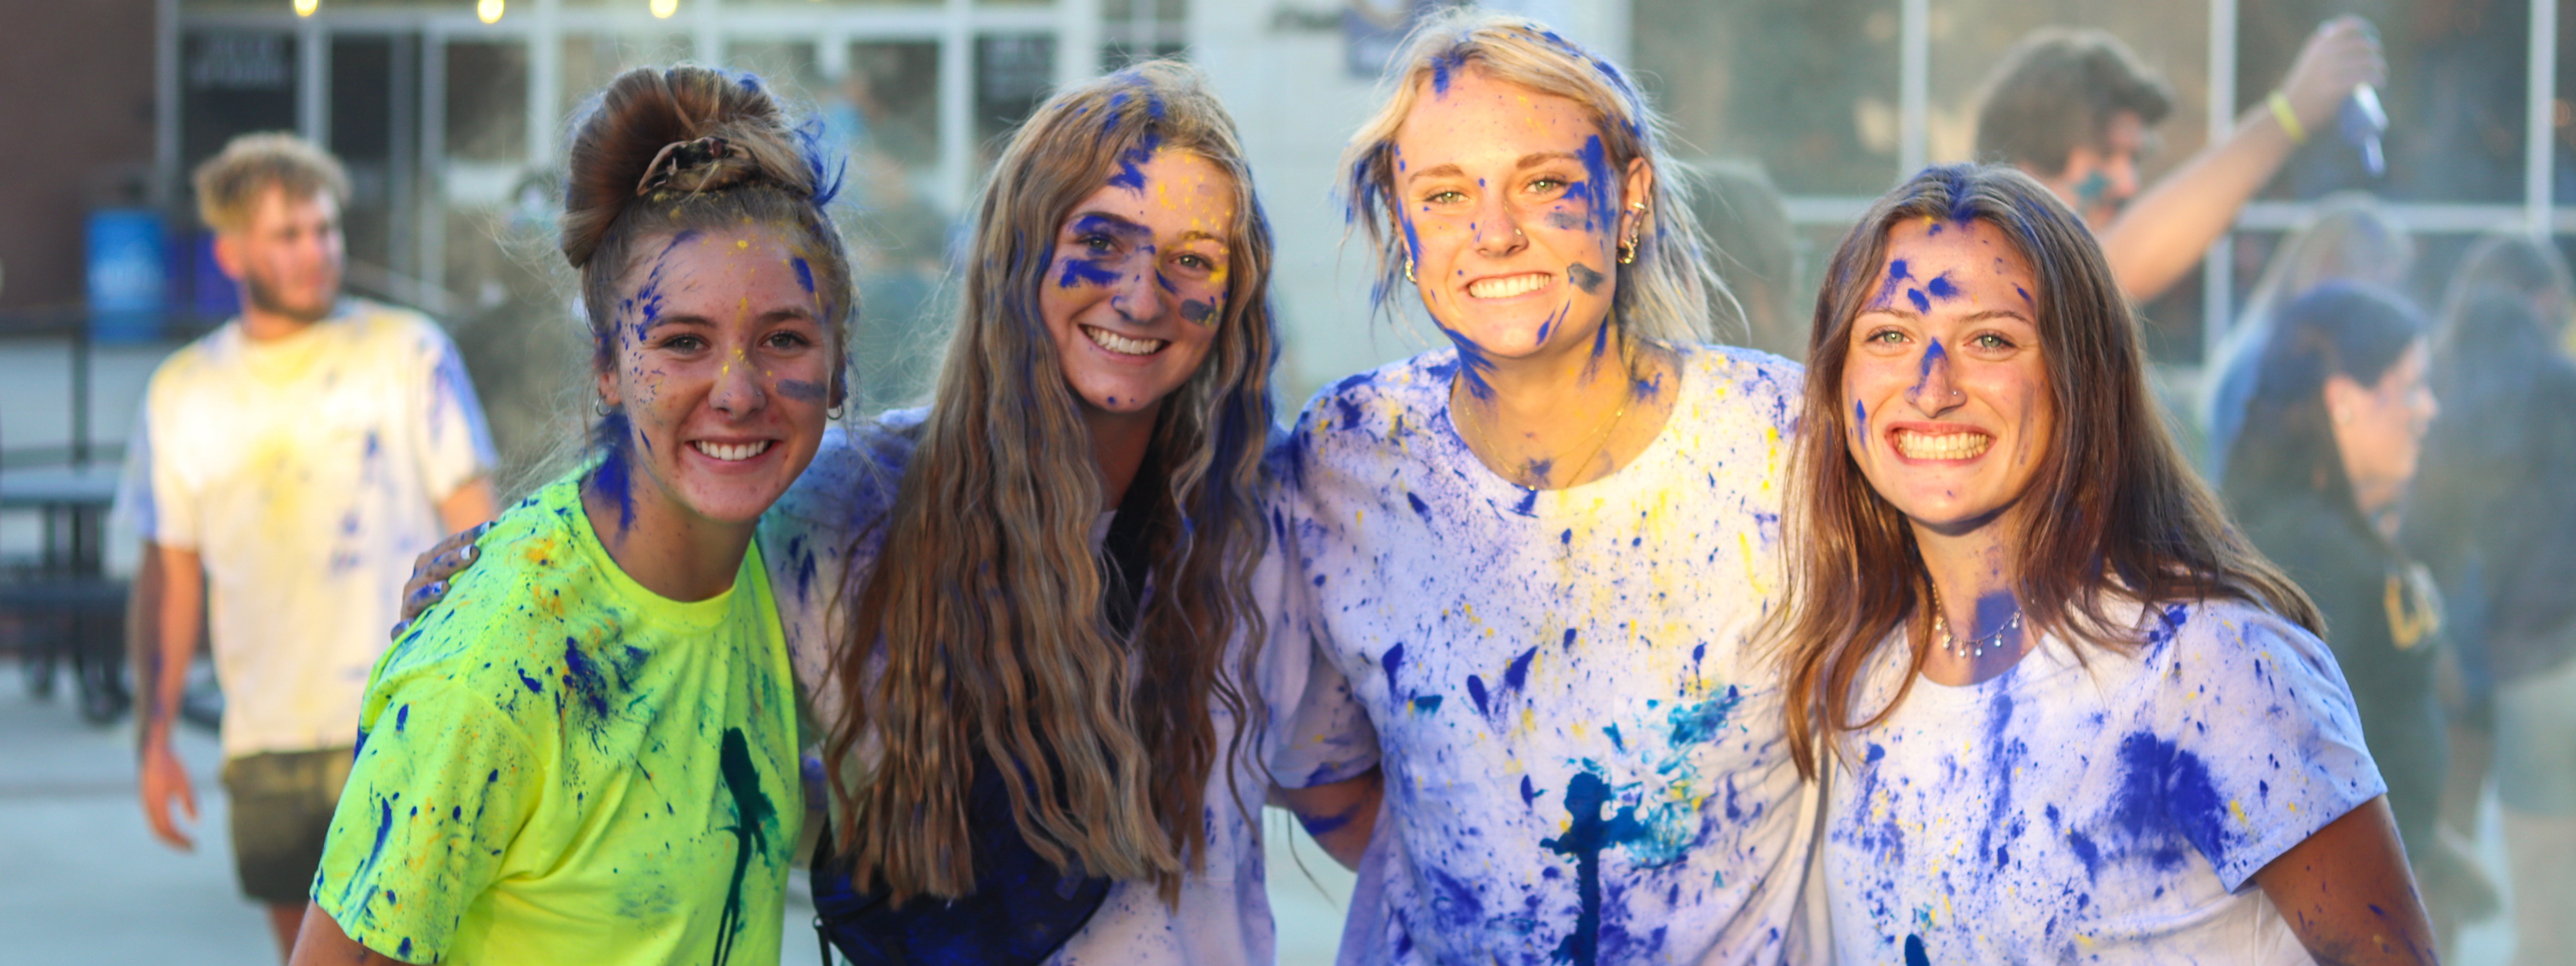 Communications Photo Header: Central girls standing together smiling, covered in blue color powder